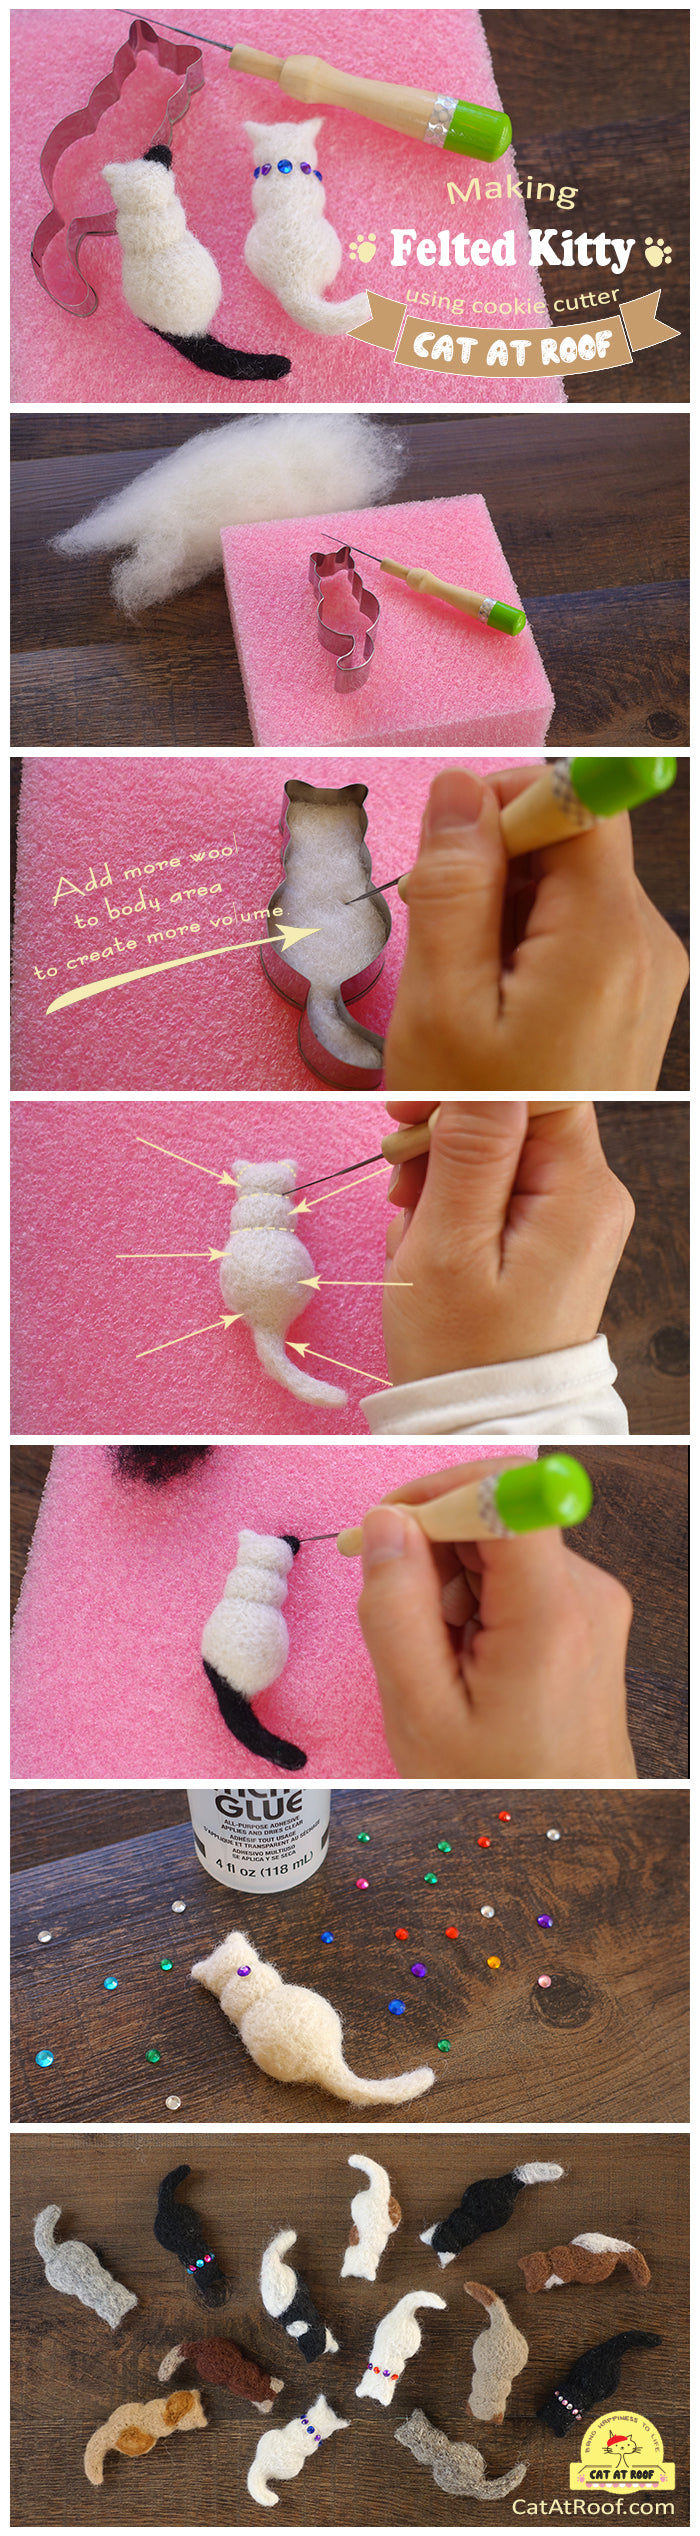 needle felting tutorial - cookie cutter felted kitty - CatAtRoof